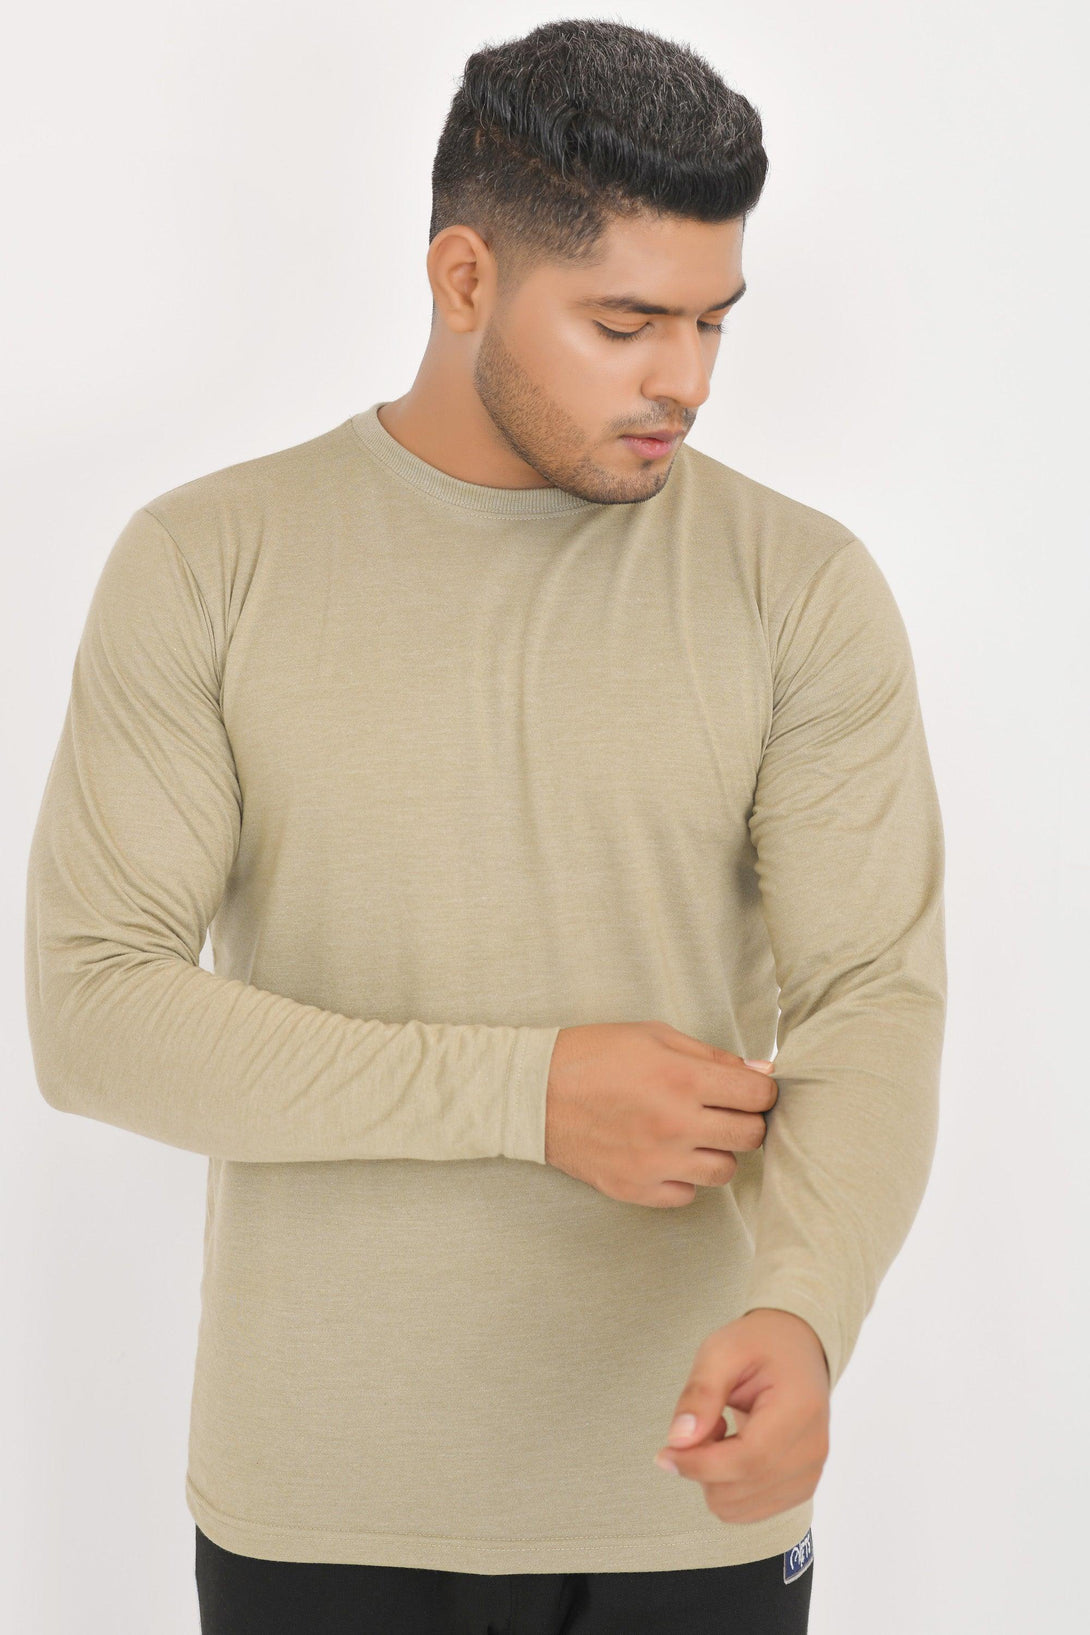 Long Sleeve Round Neck T-Shirts | NAVY- STONE - CHARCOAL - HUNTER GREEN - FTS